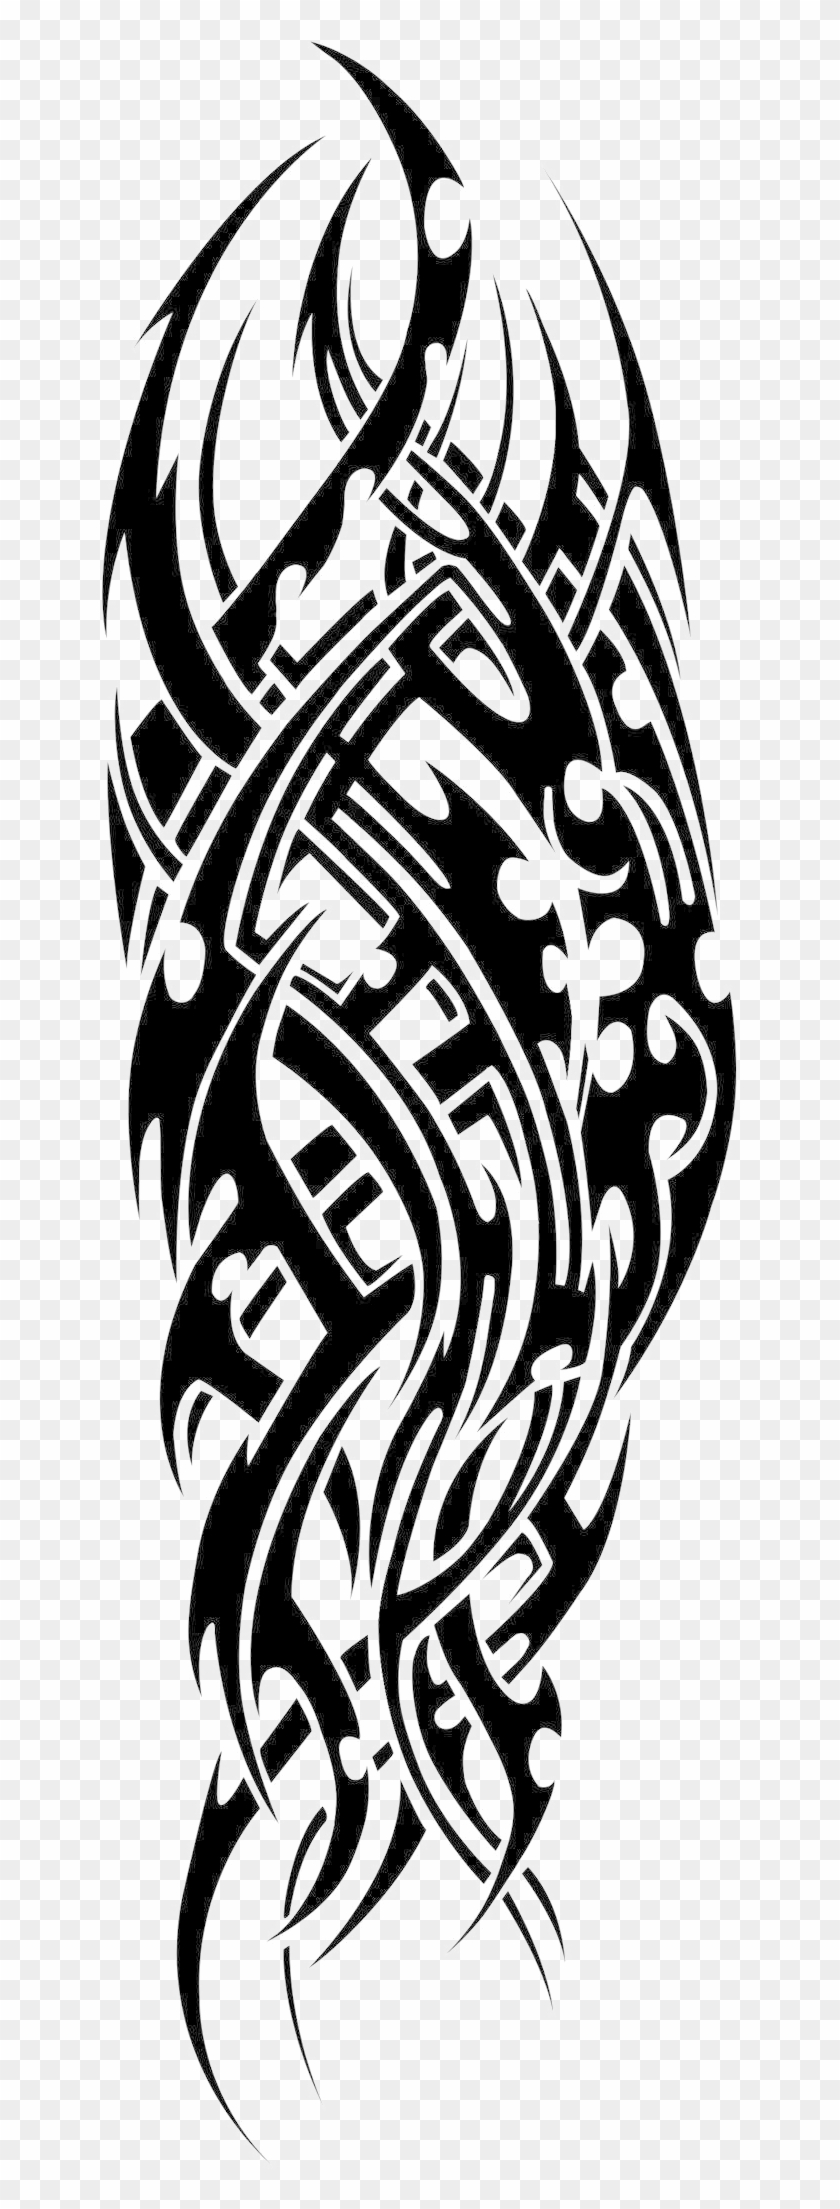 Picsart Tattoo Png Picture - Full Hand Tattoo Png Clipart